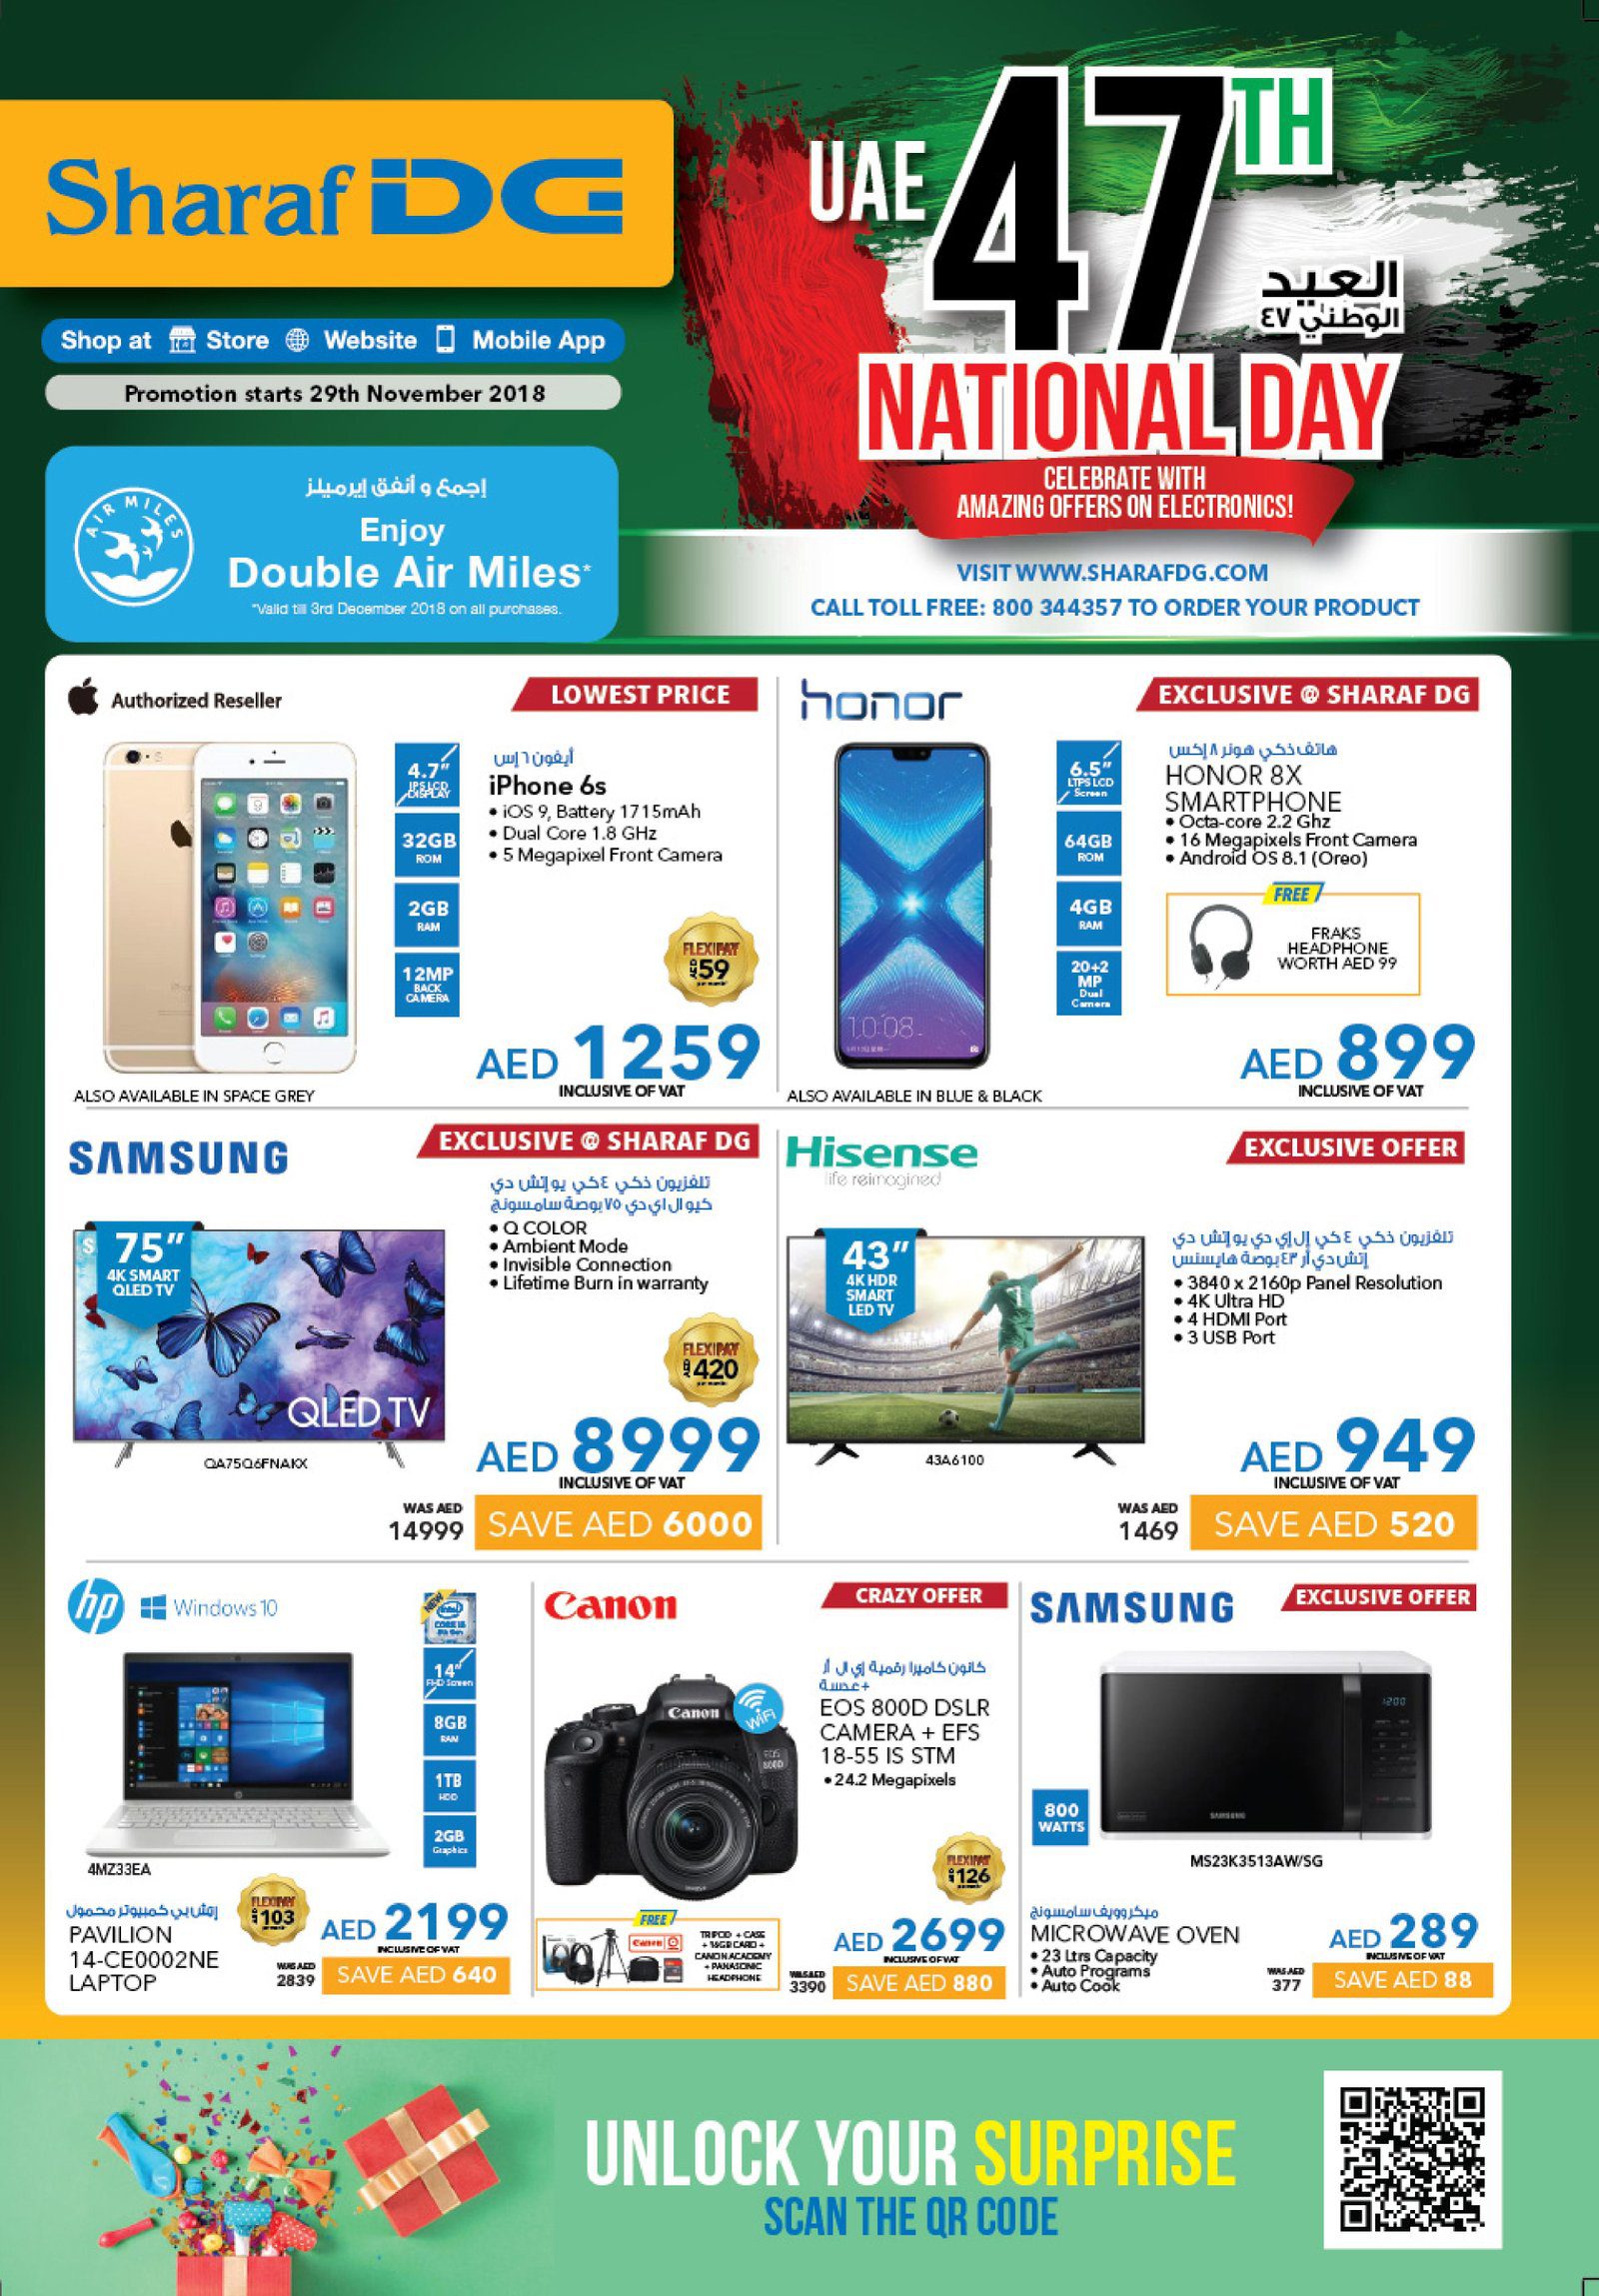 Sharaf DG National Day Exclusive Offer